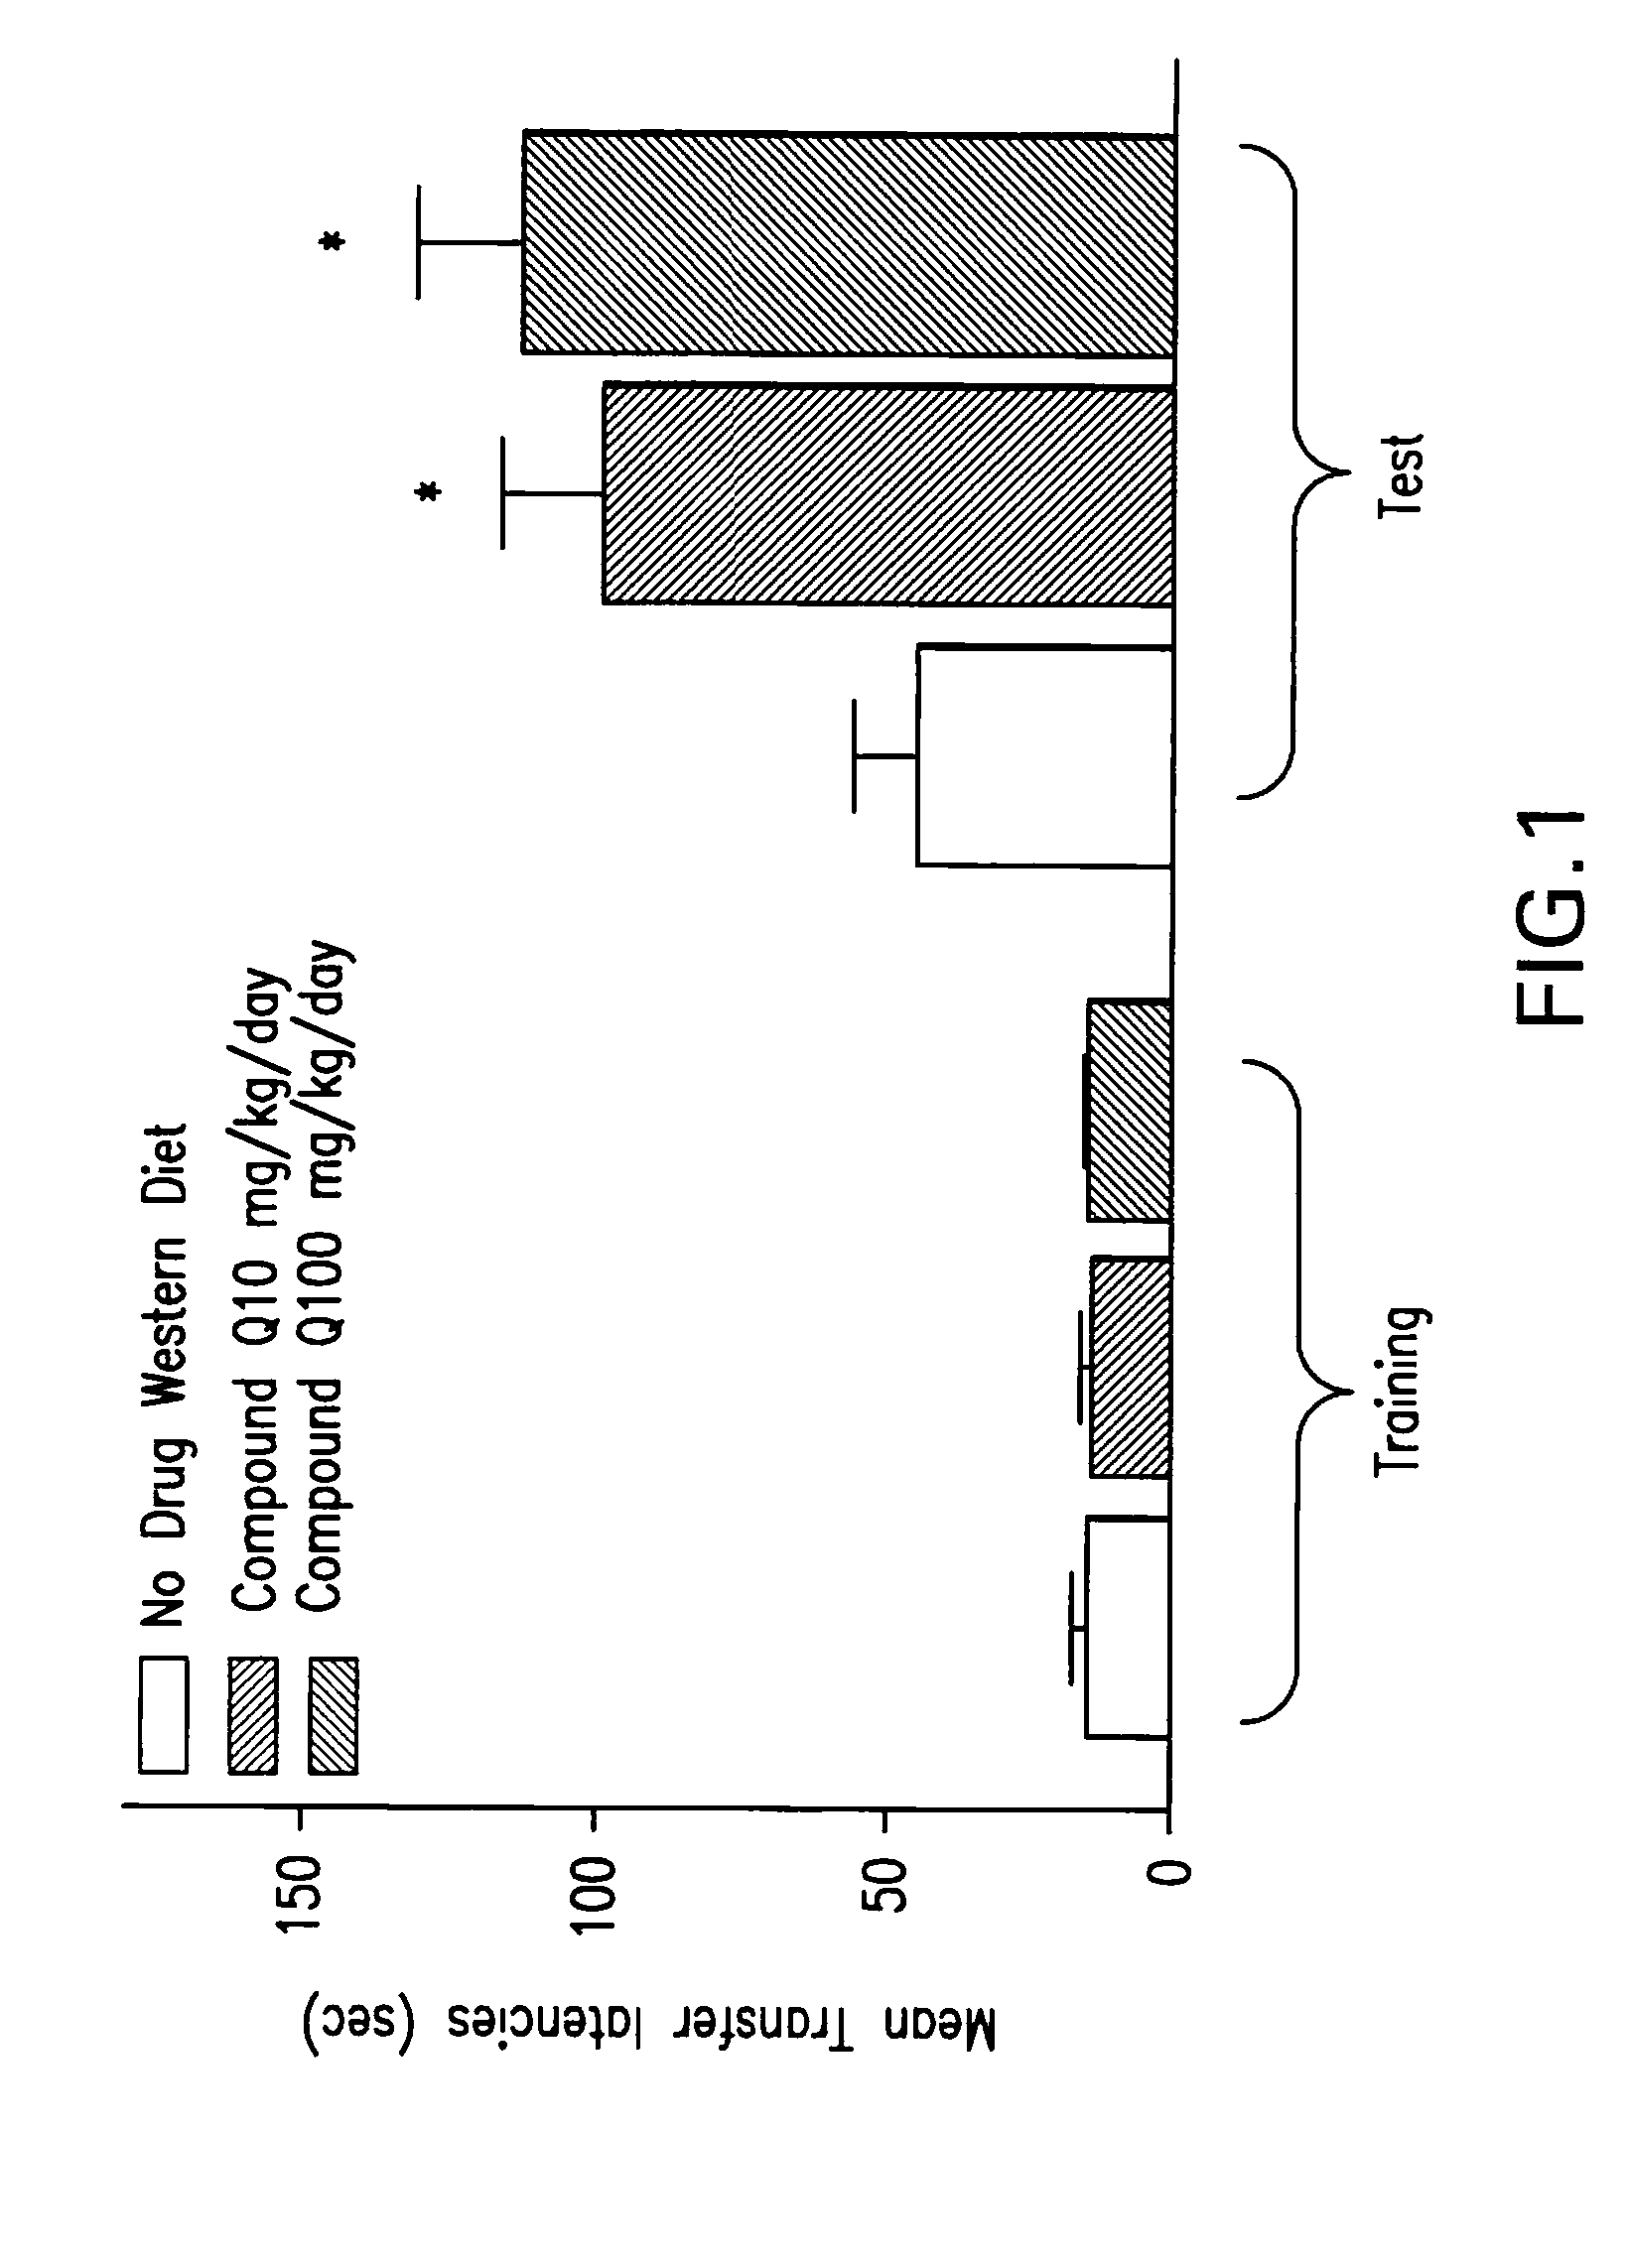 Methods of use of inhibitors of the 11-beta-hydroxysteroid dehydrogenase type 1 enzyme